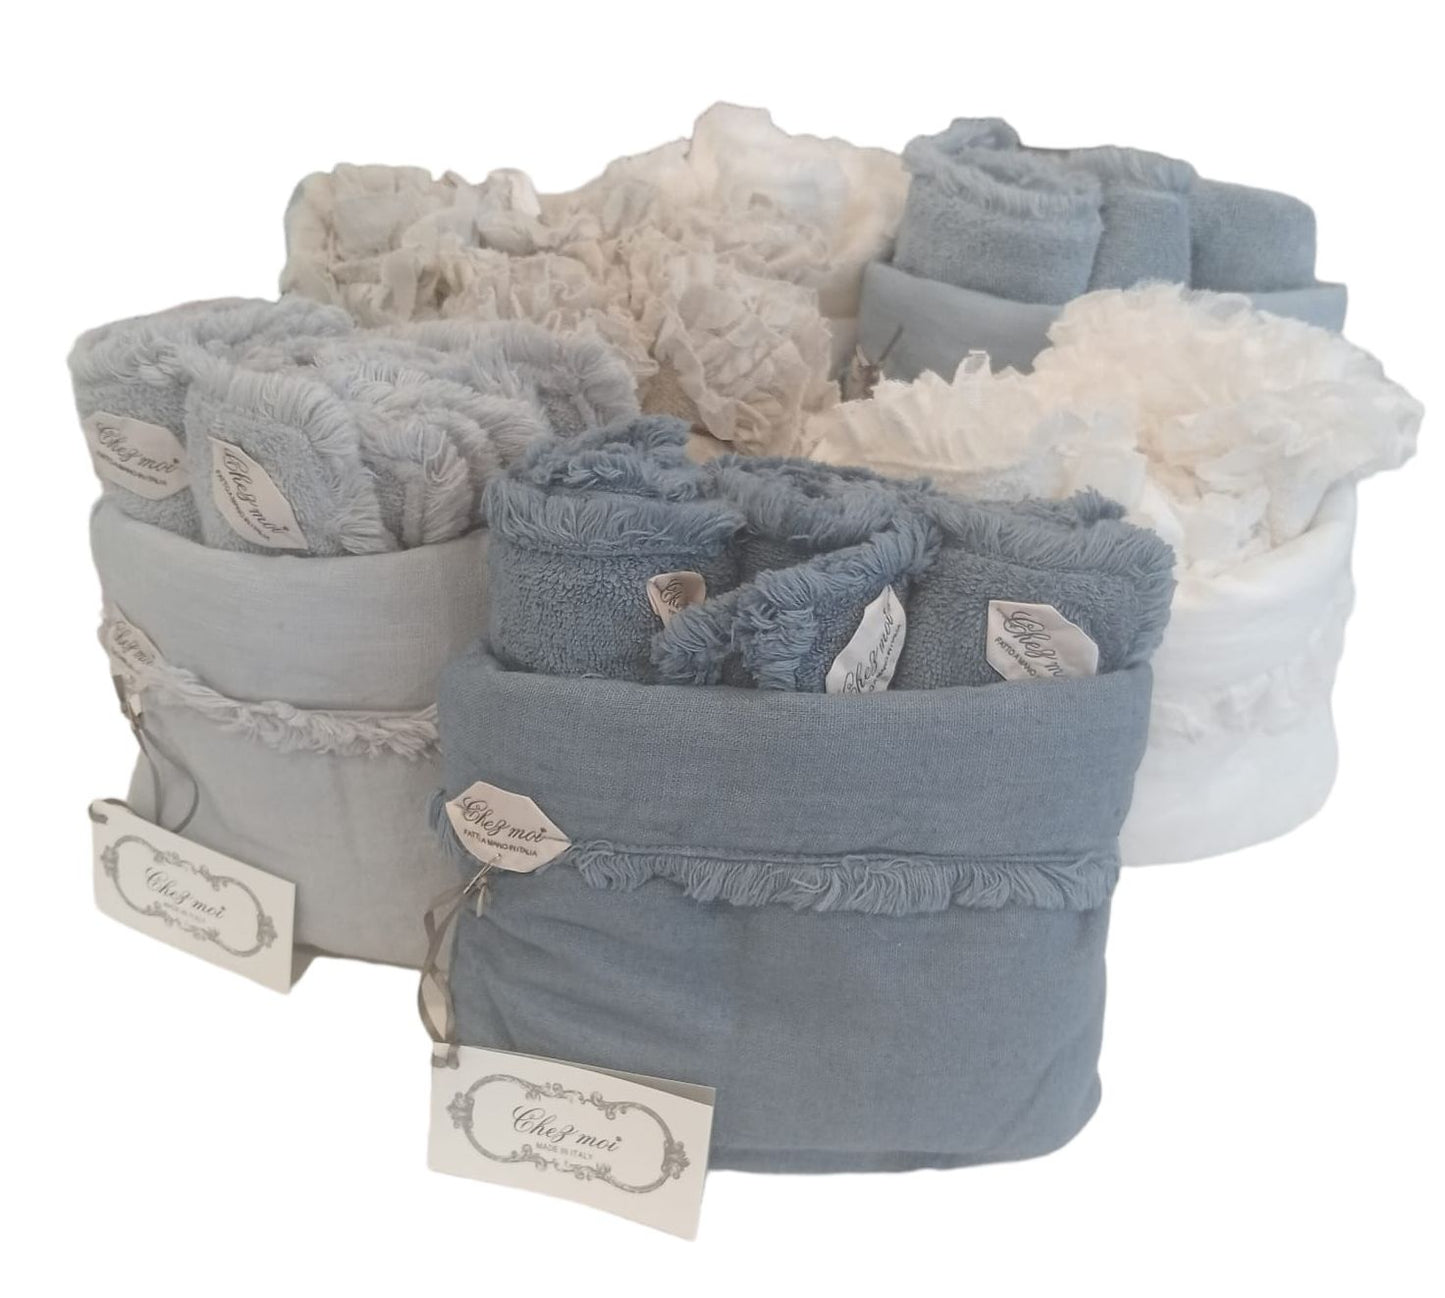 Lavette set of 3 bath towels with elegant linen bag, color: Cornflower, fine fabrics, 100% Made in Italy - Chez Moi